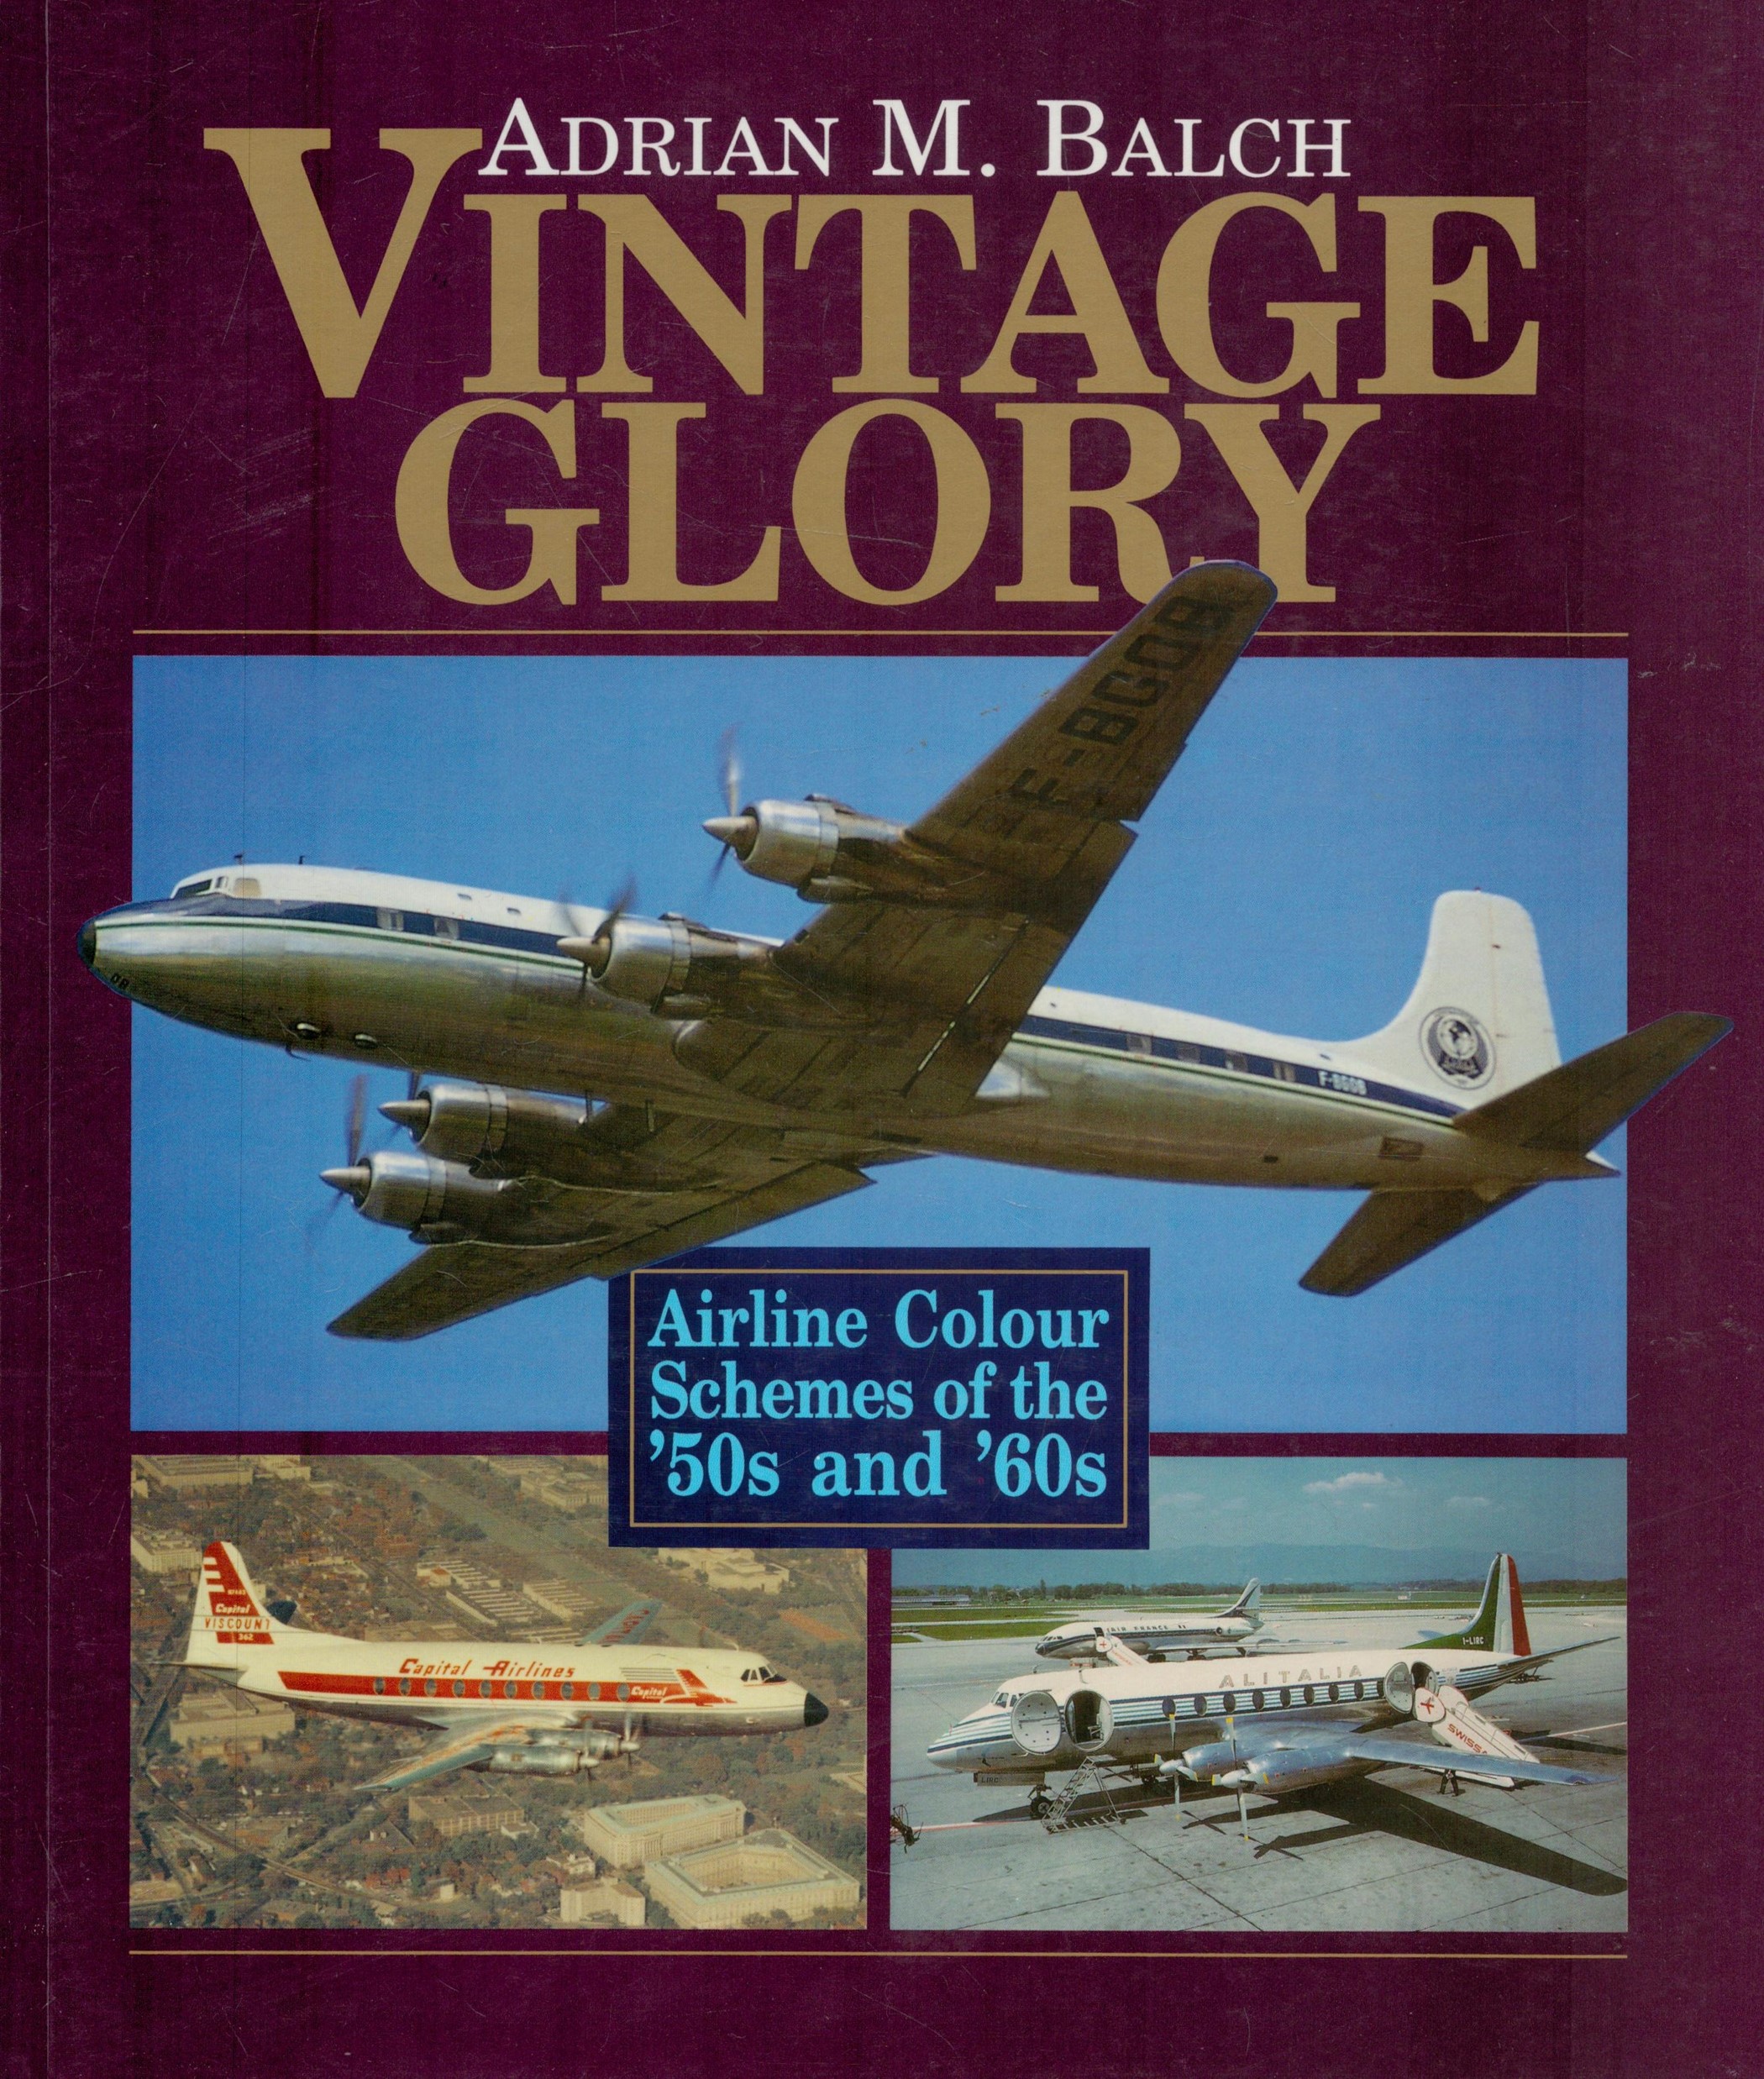 Airliners of the 50s, 60s and 70s, Publications Include Vintage Glory - Airline Colour Schemes of - Image 3 of 6